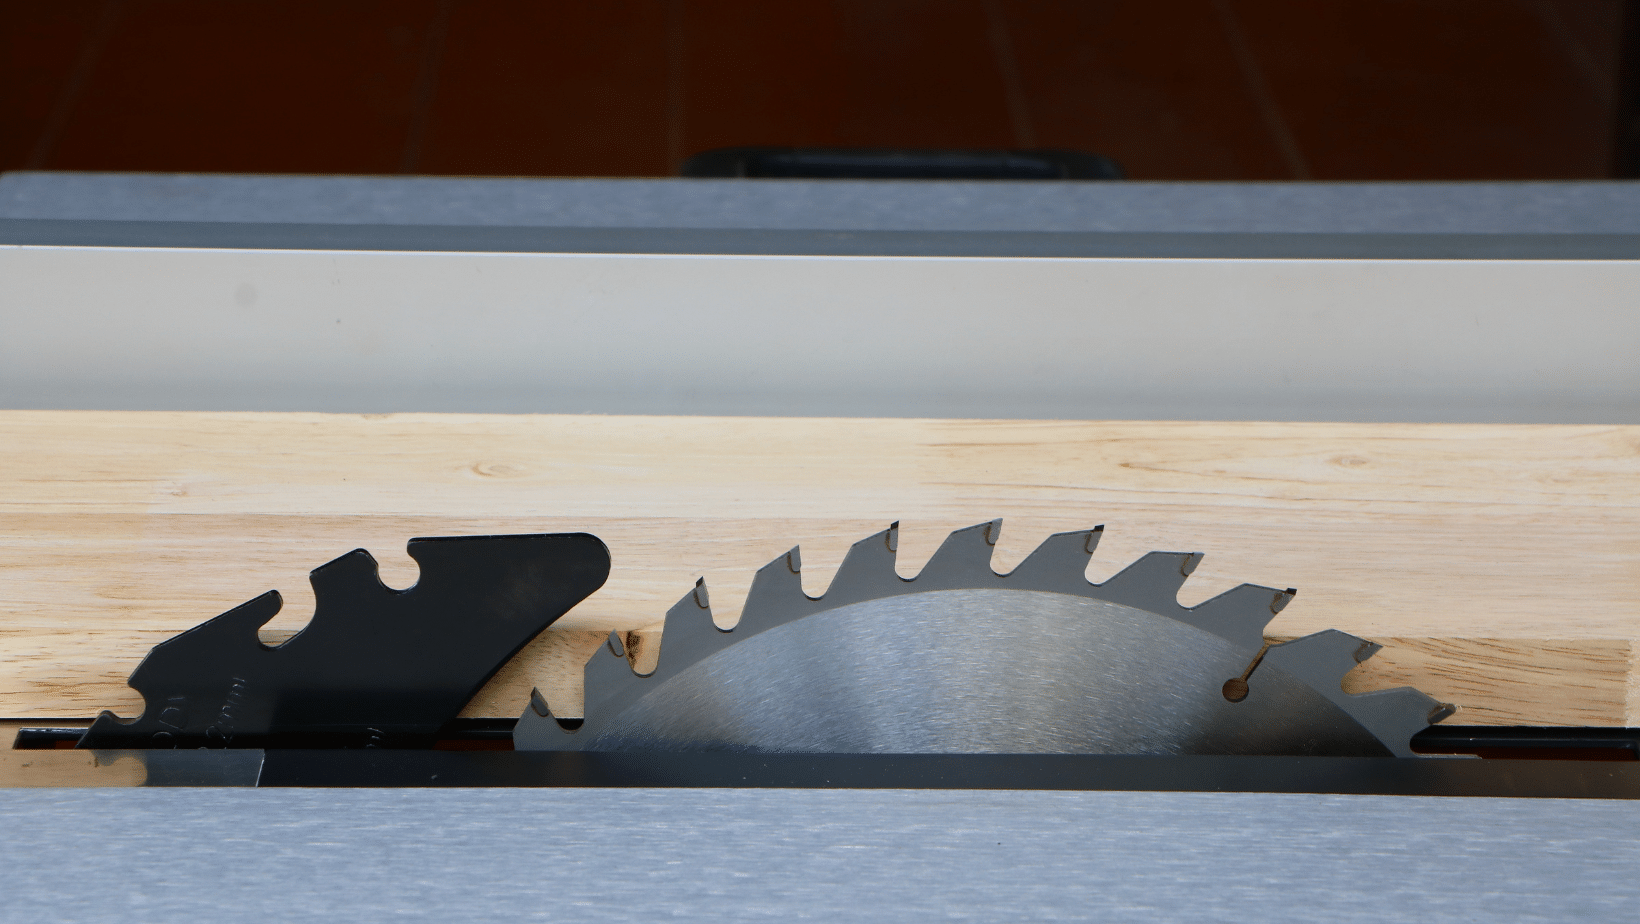 How To Dewalt Jobsite Table Saw Blade To 45 Degree Angle?